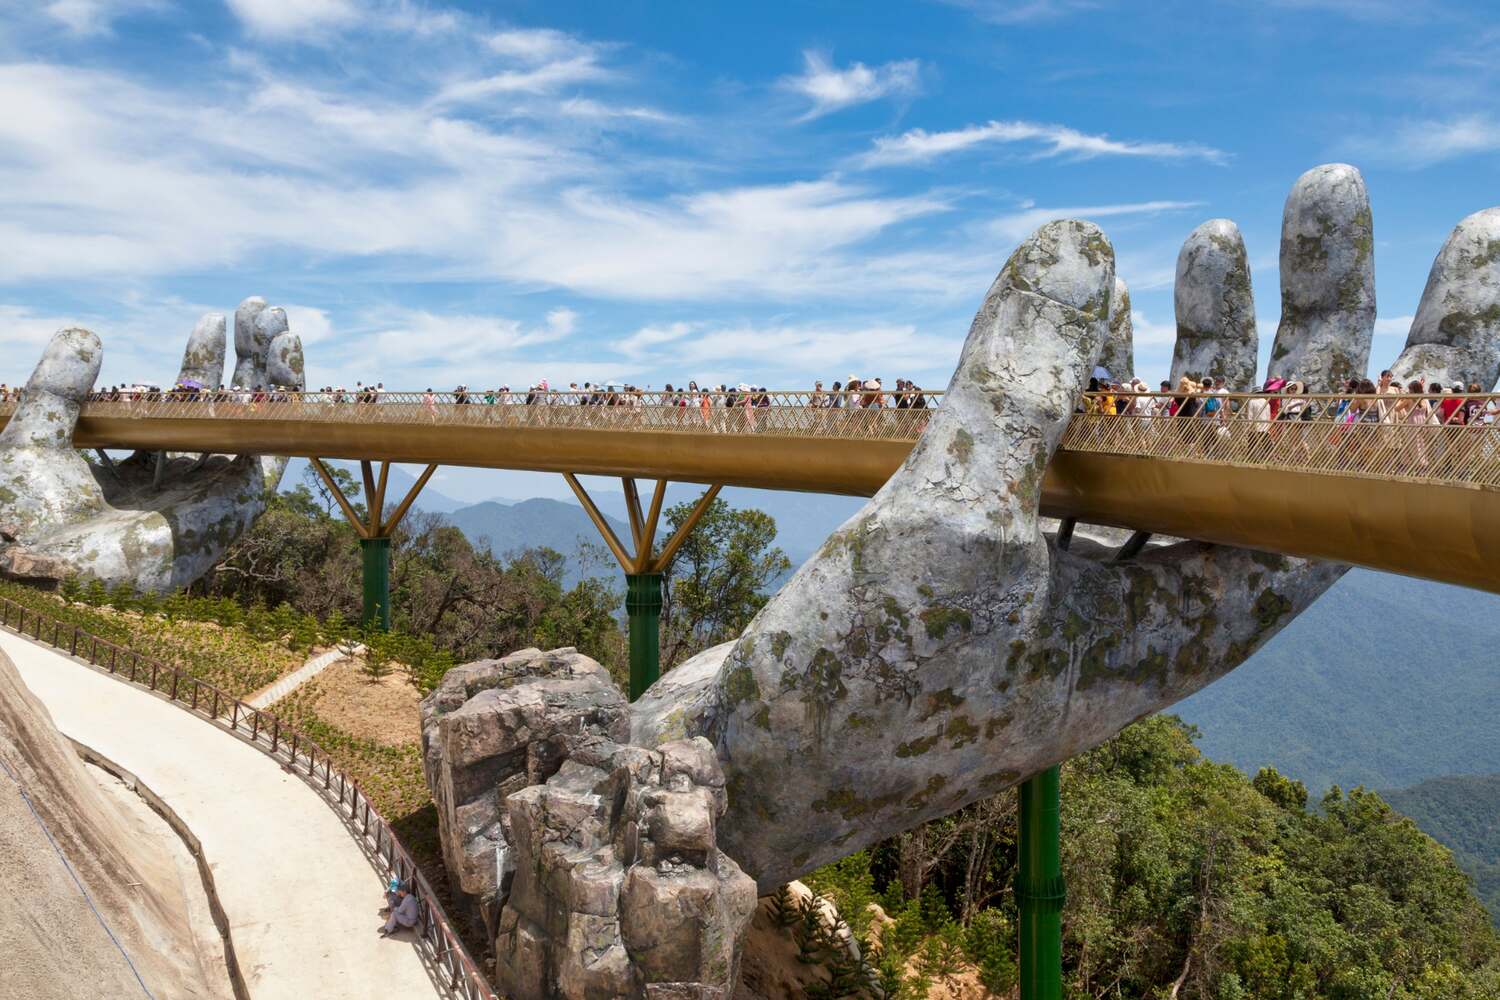 A unique bridge supported by giant stone hands extending upwards, with people walking across and greenery below.